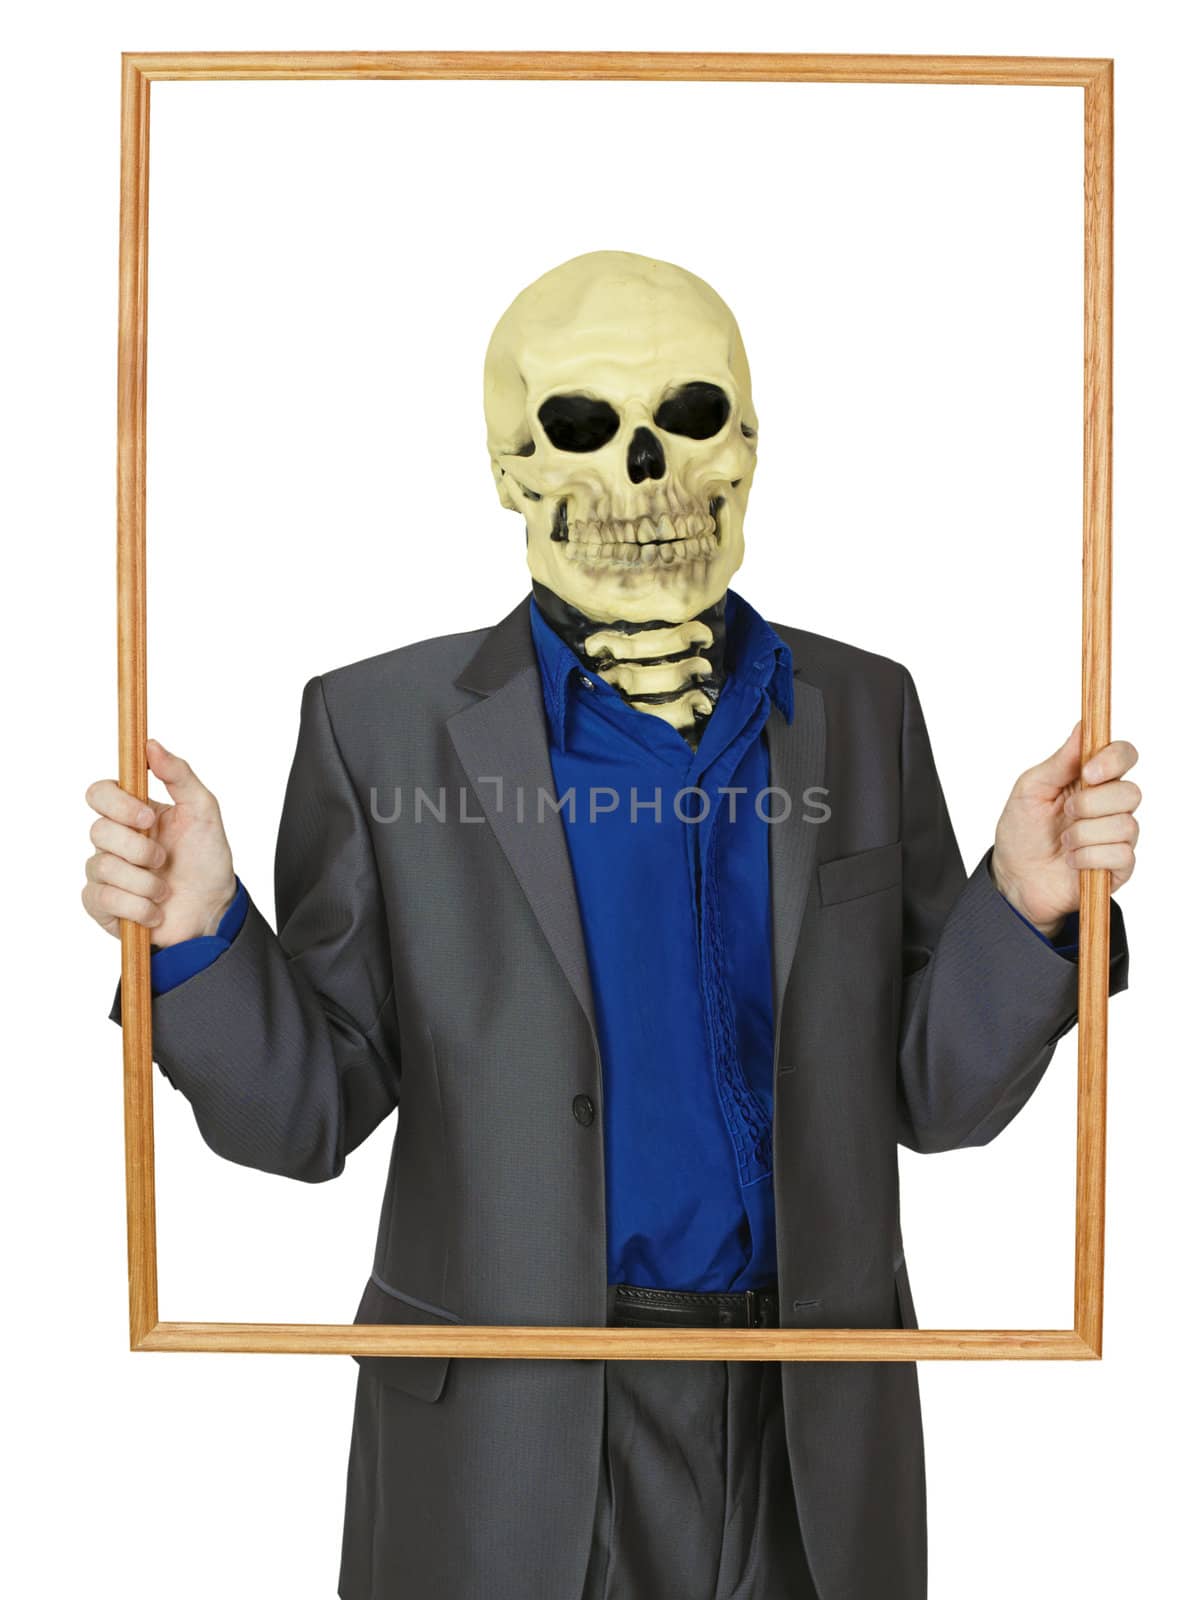 Masked man skeleton, placed himself in frame by pzaxe